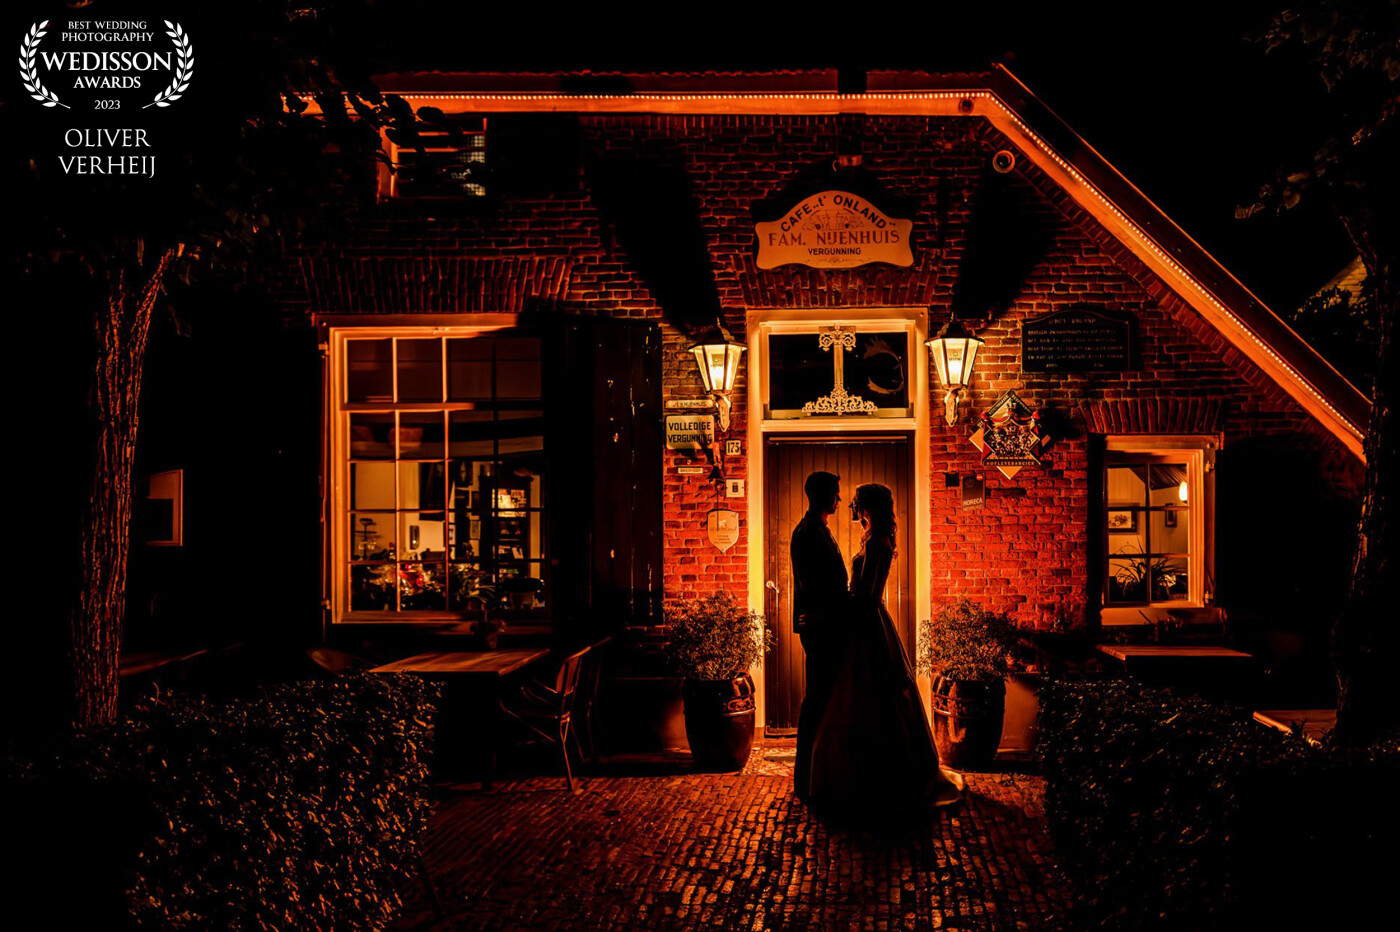 This old farm house in the Netherlands with its authentic features is the perfect back drop for this warm silhouette.